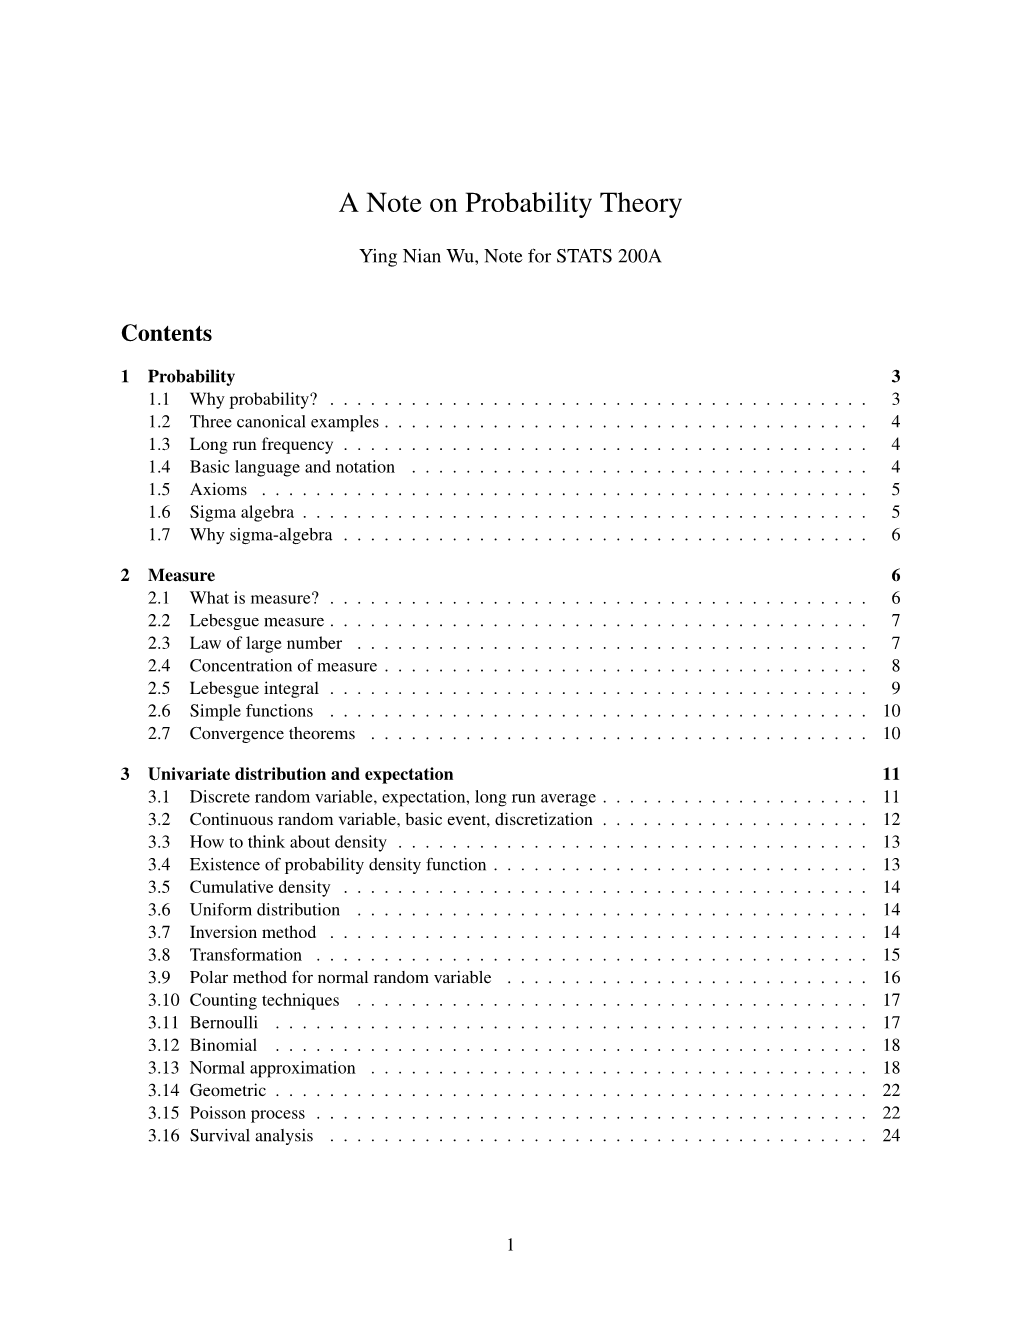 A Note on Probability Theory